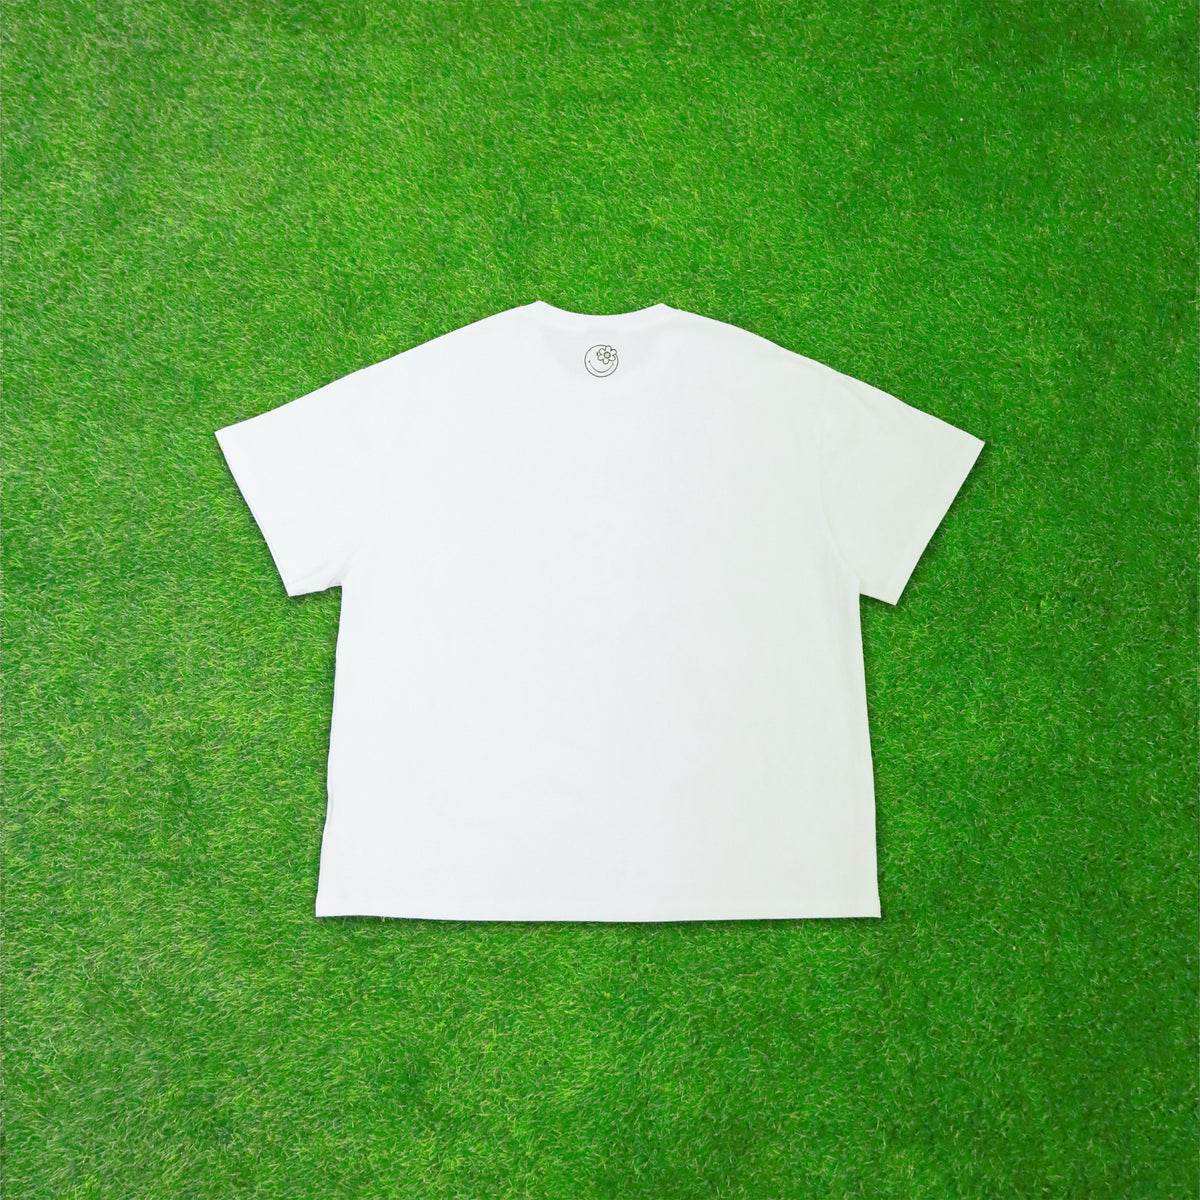 BASE TSHIRT | WHITE, Short sleeve, Oversized Fit, Ribbed crewneck, Yellow woven flag logo at the left sleeve, Collaboration with Smiley, Color: White, Material: 100% Cotton